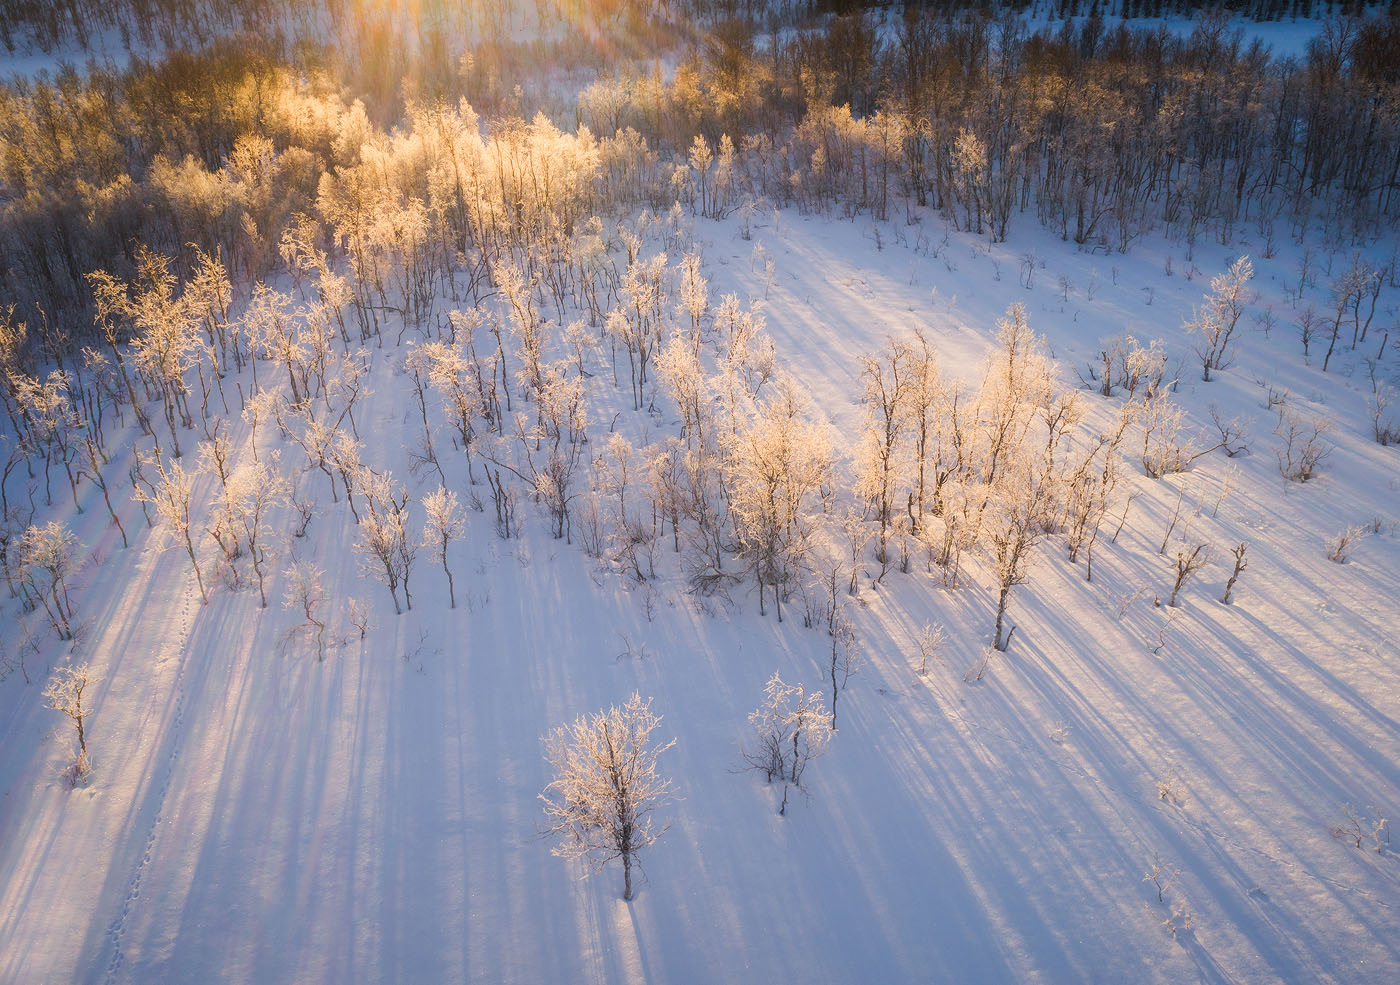 A beautiful scene I found just next to the road, when driving in Norway. <br>DJI Phantom 4 Pro, f/9, 1/200 sec, ISO 200 <br>Arctic Norway